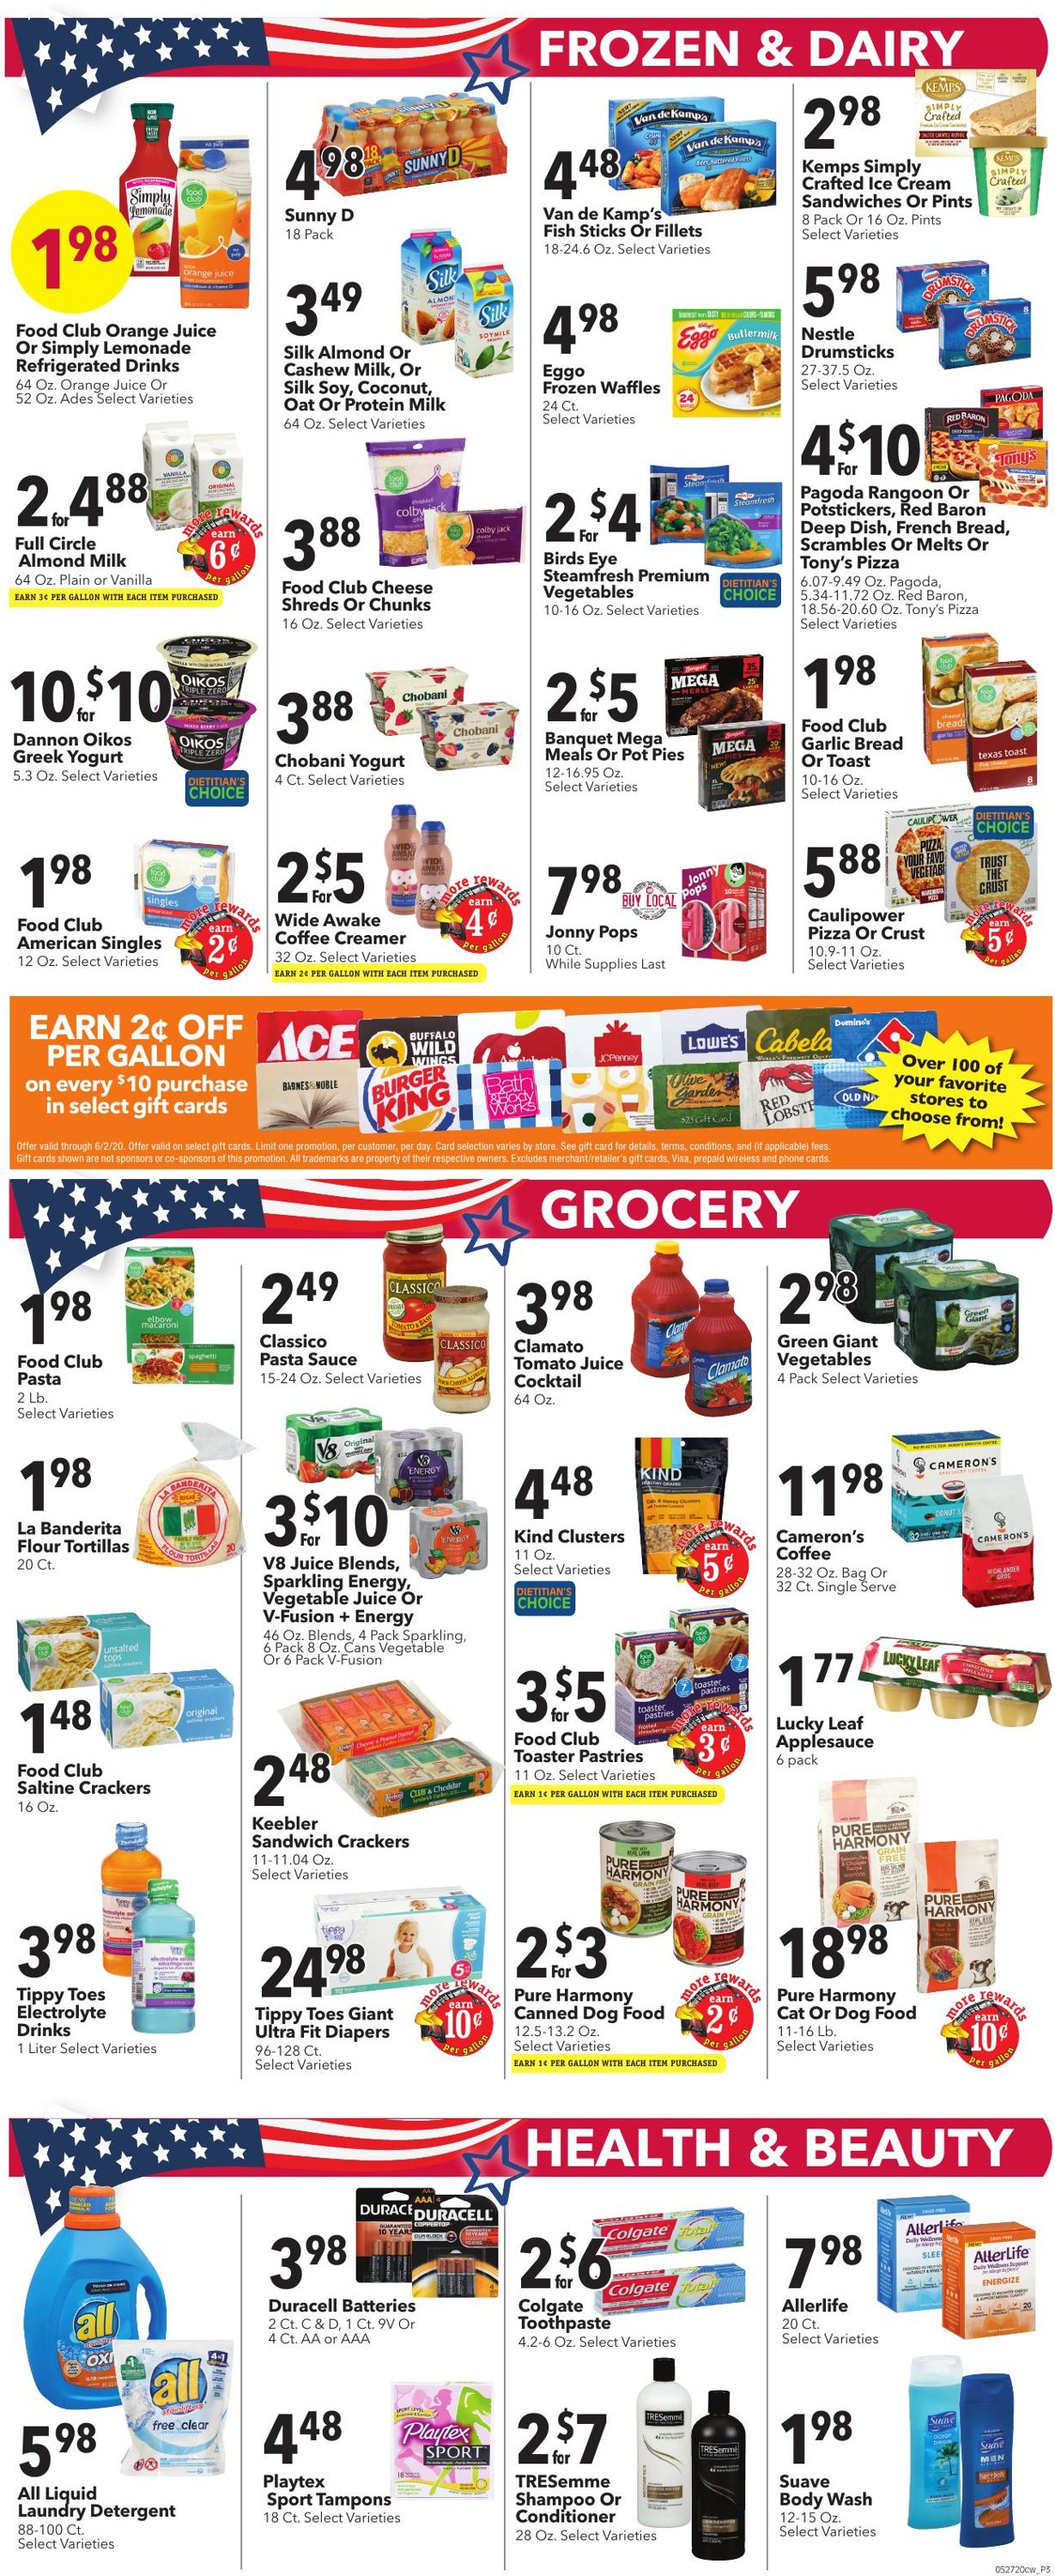 Cash Wise Weekly Ad Circular - valid 05/27-06/02/2020 (Page 3)